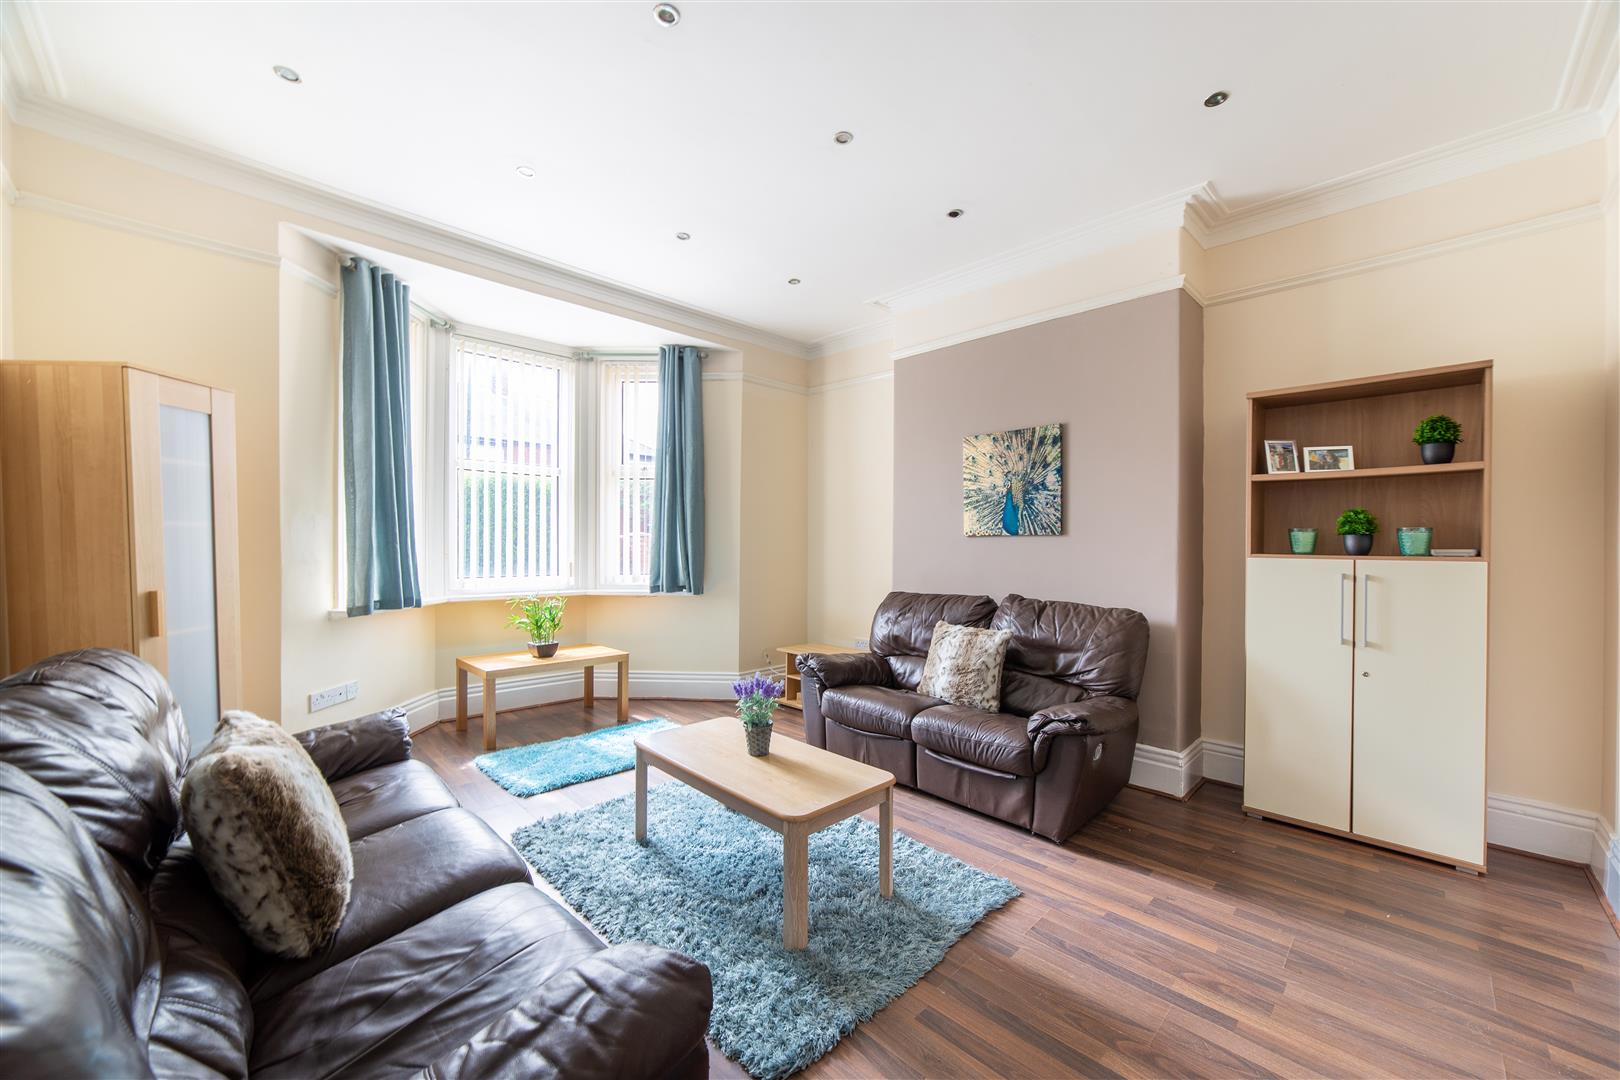 4 bed terraced house to rent in Rothbury Terrace, Heaton - Property Image 1